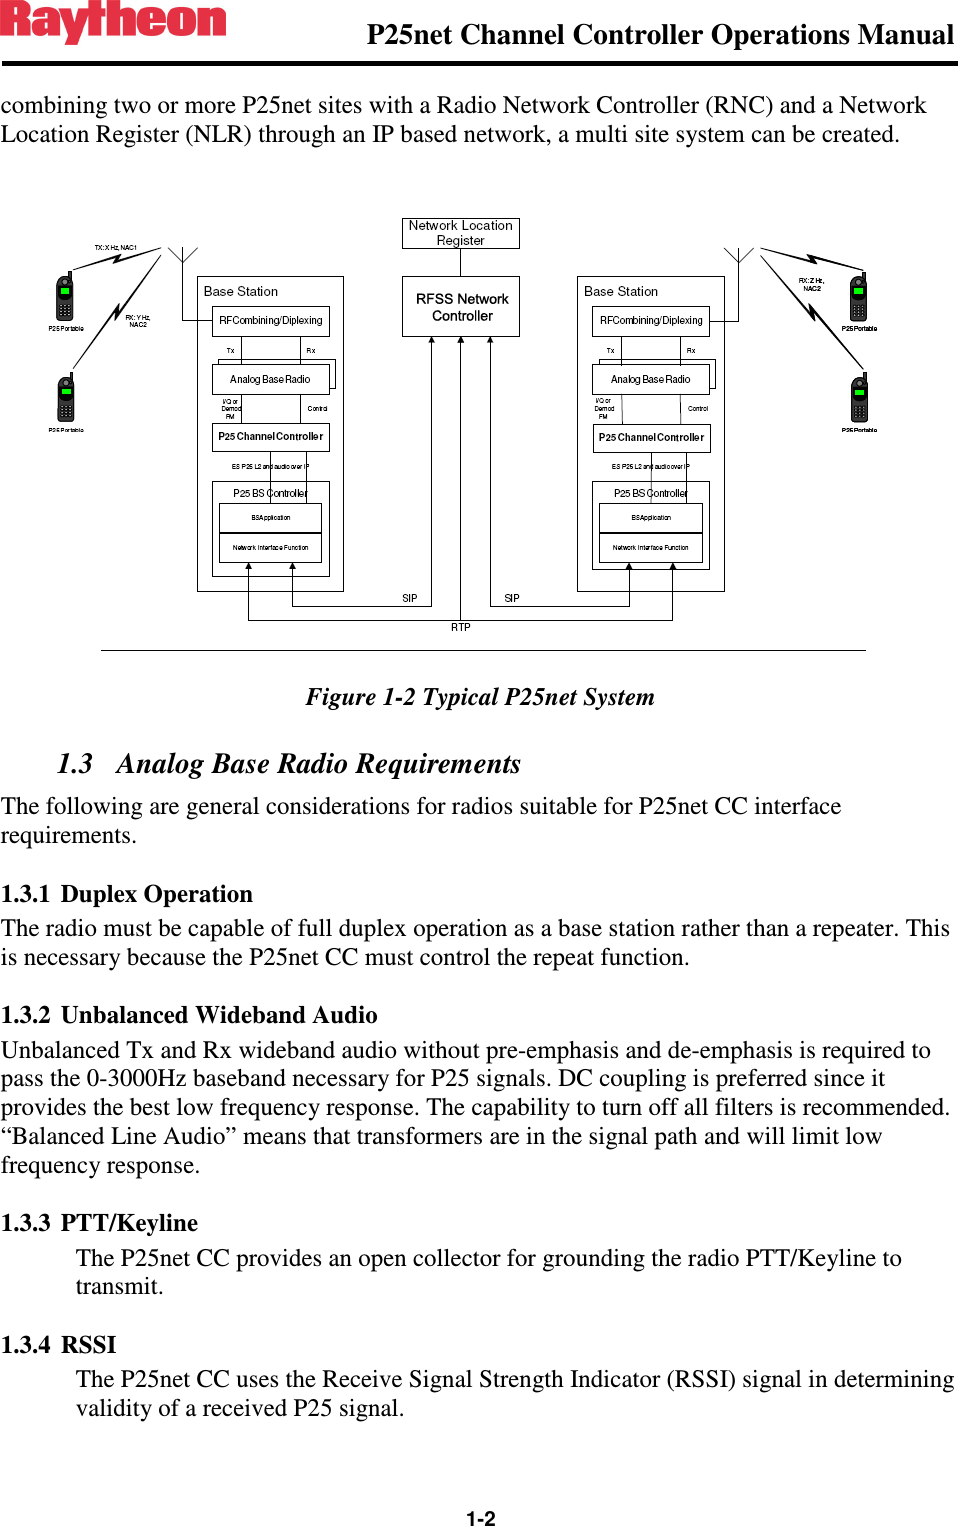                P25net Channel Controller Operations Manual  1-2  combining two or more P25net sites with a Radio Network Controller (RNC) and a Network Location Register (NLR) through an IP based network, a multi site system can be created.   Figure 1-2 Typical P25net System 1.3 Analog Base Radio Requirements The following are general considerations for radios suitable for P25net CC interface requirements. 1.3.1 Duplex Operation The radio must be capable of full duplex operation as a base station rather than a repeater. This is necessary because the P25net CC must control the repeat function. 1.3.2 Unbalanced Wideband Audio Unbalanced Tx and Rx wideband audio without pre-emphasis and de-emphasis is required to pass the 0-3000Hz baseband necessary for P25 signals. DC coupling is preferred since it provides the best low frequency response. The capability to turn off all filters is recommended. “Balanced Line Audio” means that transformers are in the signal path and will limit low frequency response. 1.3.3 PTT/Keyline The P25net CC provides an open collector for grounding the radio PTT/Keyline to transmit. 1.3.4 RSSI The P25net CC uses the Receive Signal Strength Indicator (RSSI) signal in determining validity of a received P25 signal. 